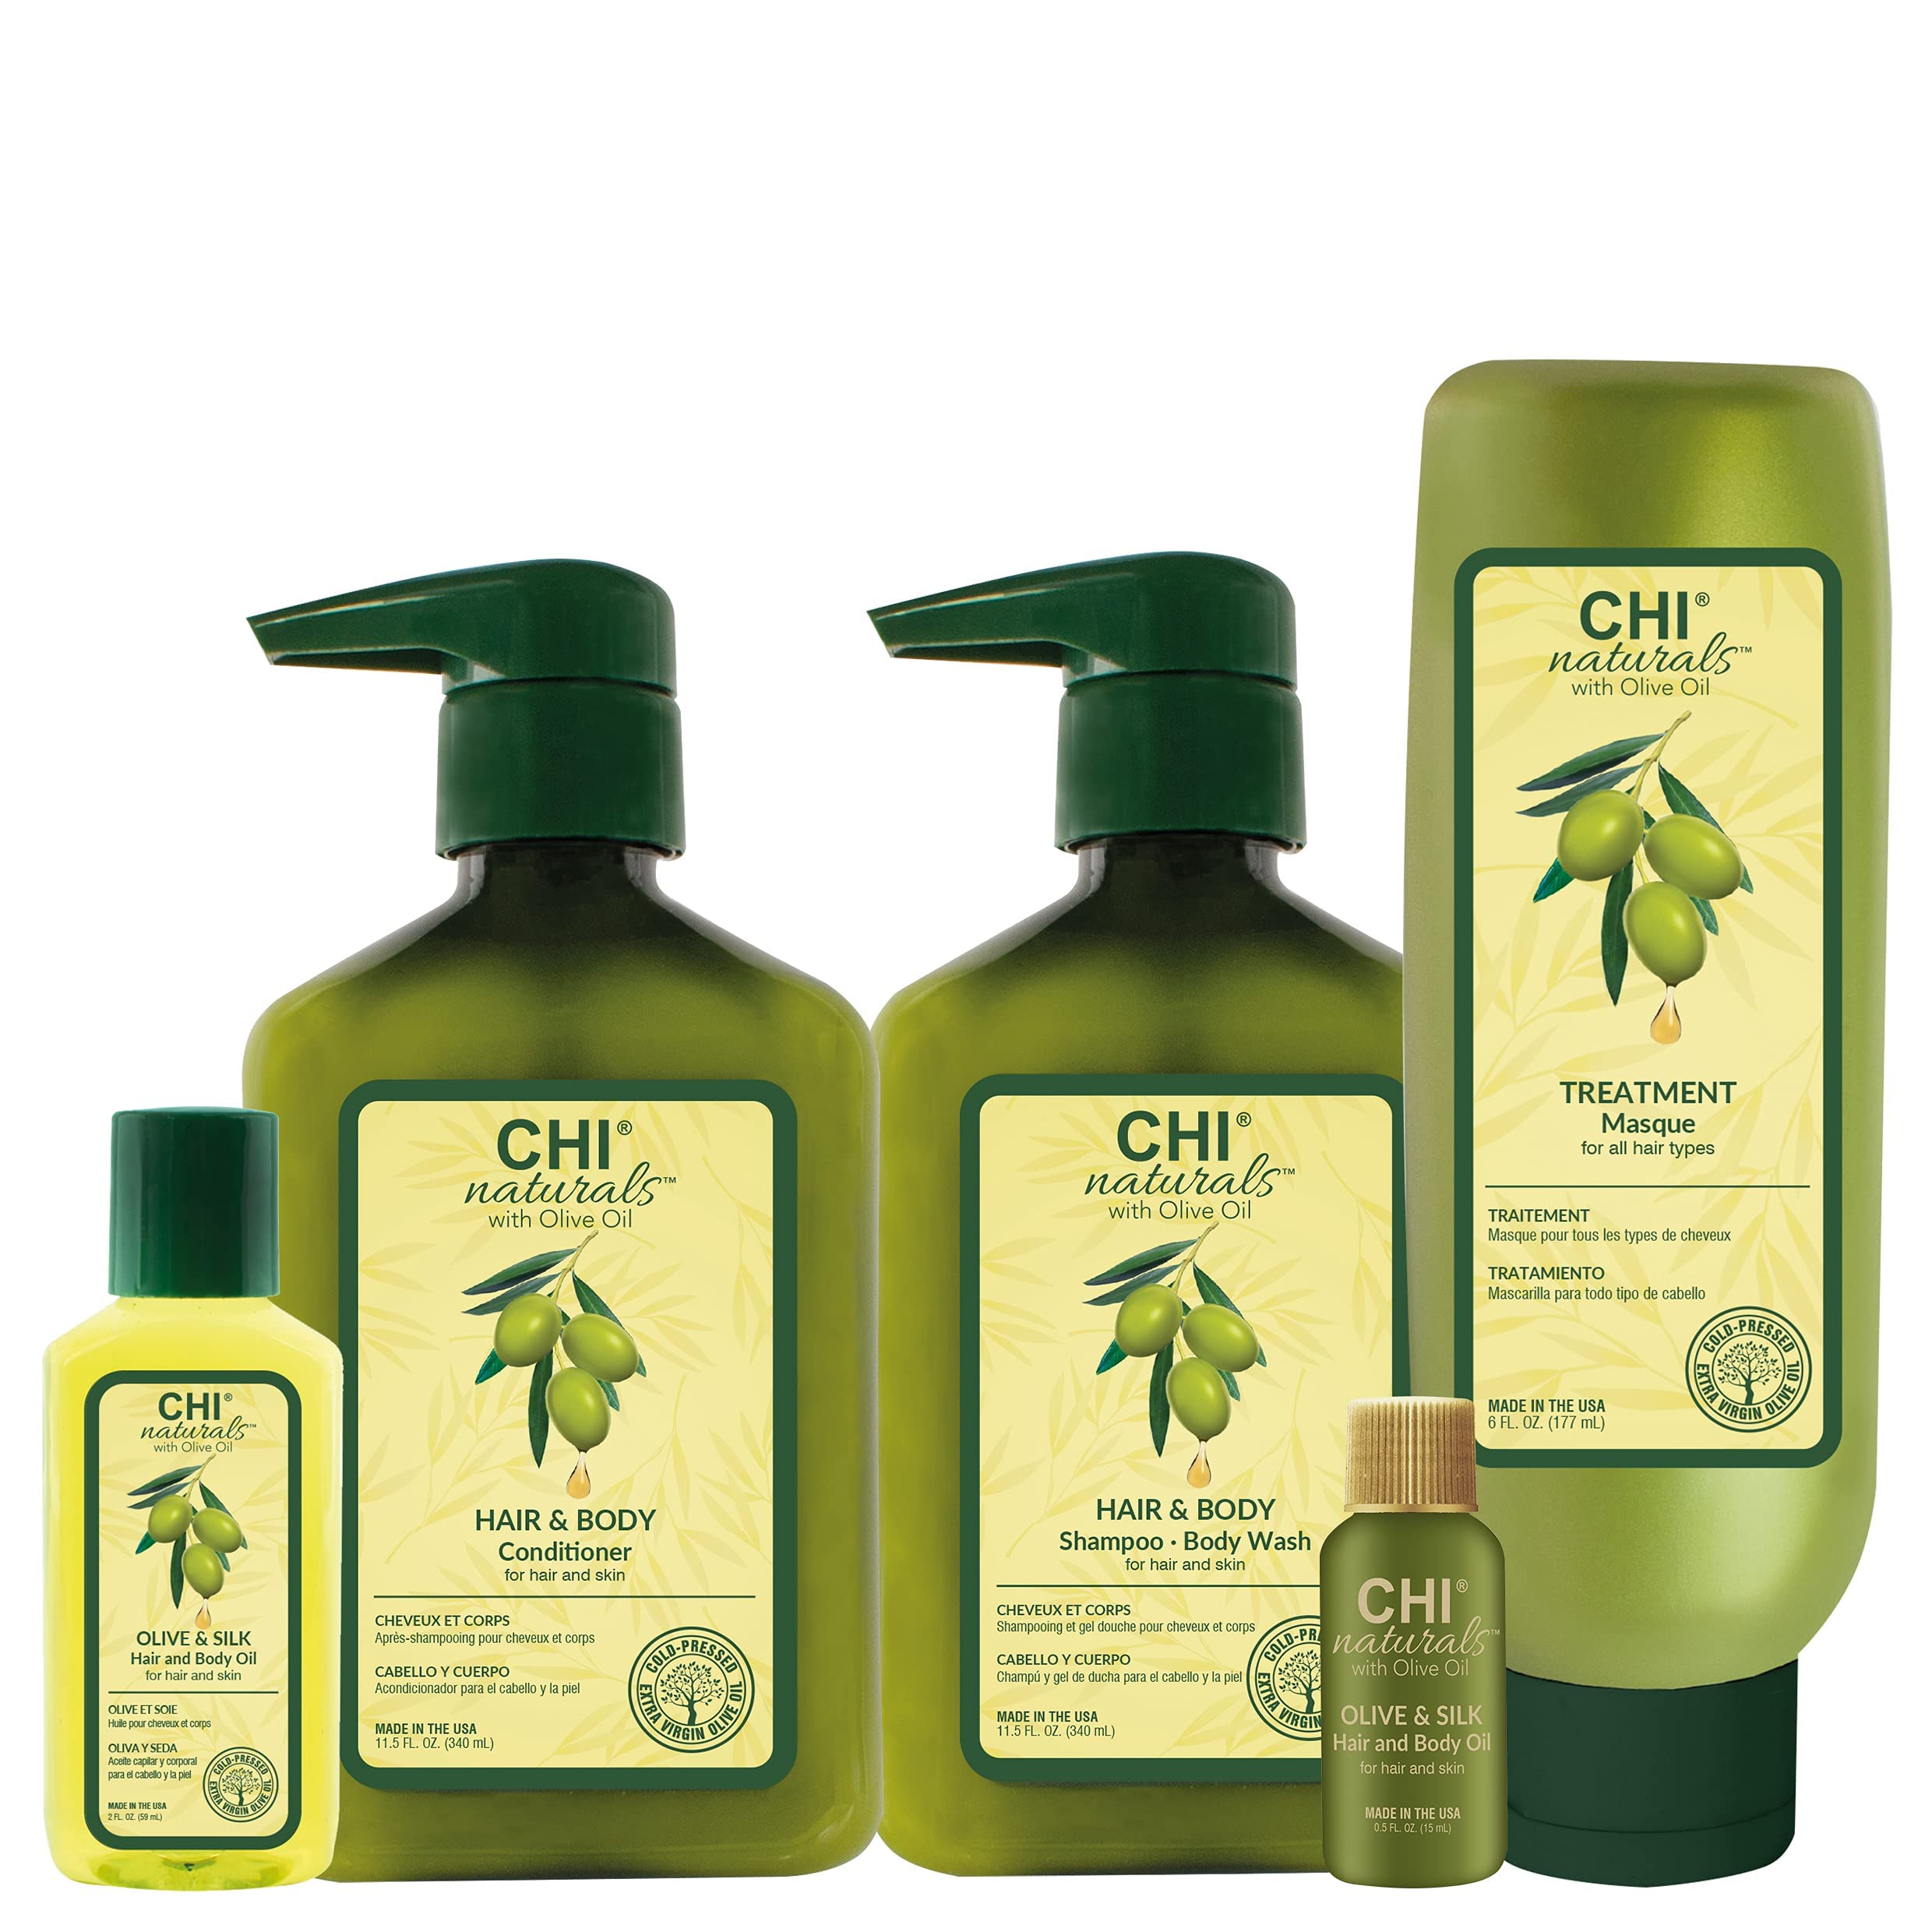 CHI Naturals with Olive Oil Hair and Body Conditioner, 11.5oz